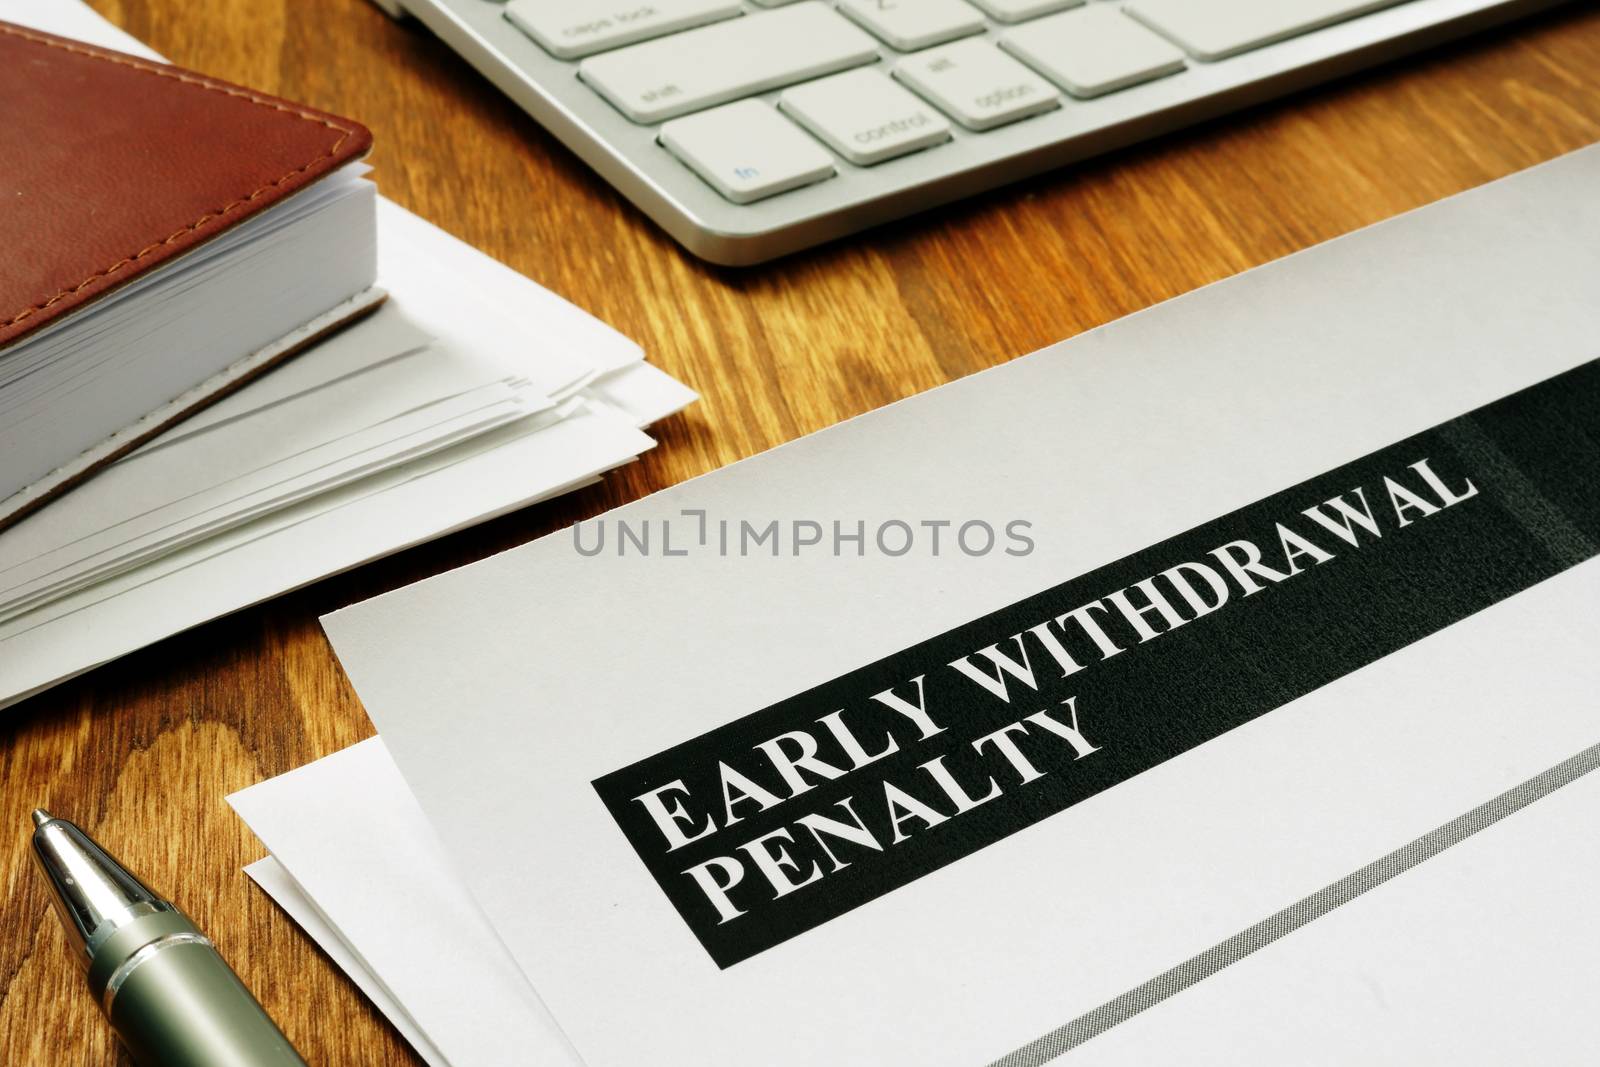 Early withdrawal penalty letter on the desk. by designer491